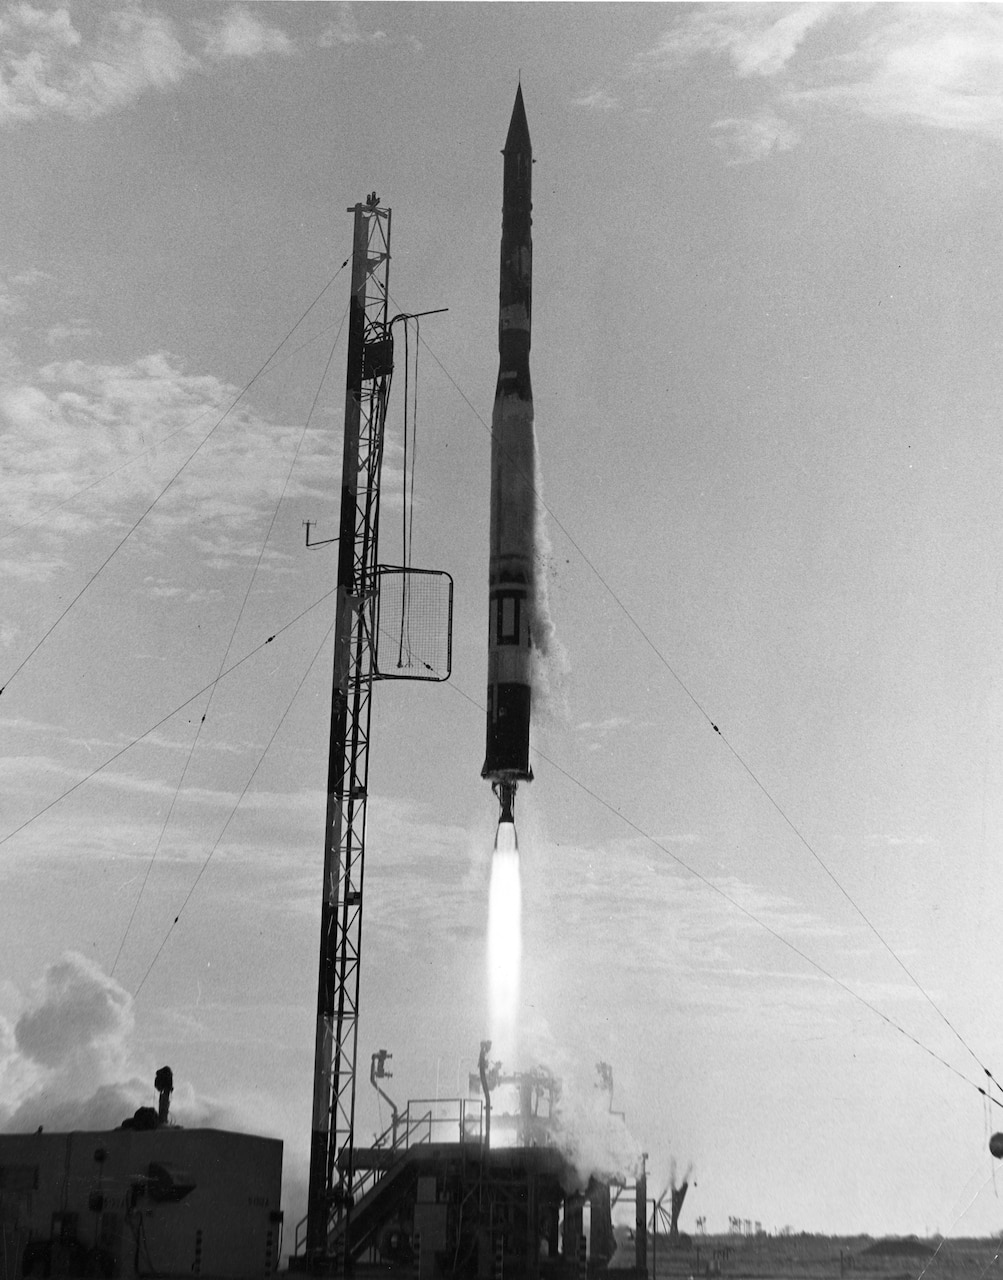 Vanguard I launch on March 17, 1958